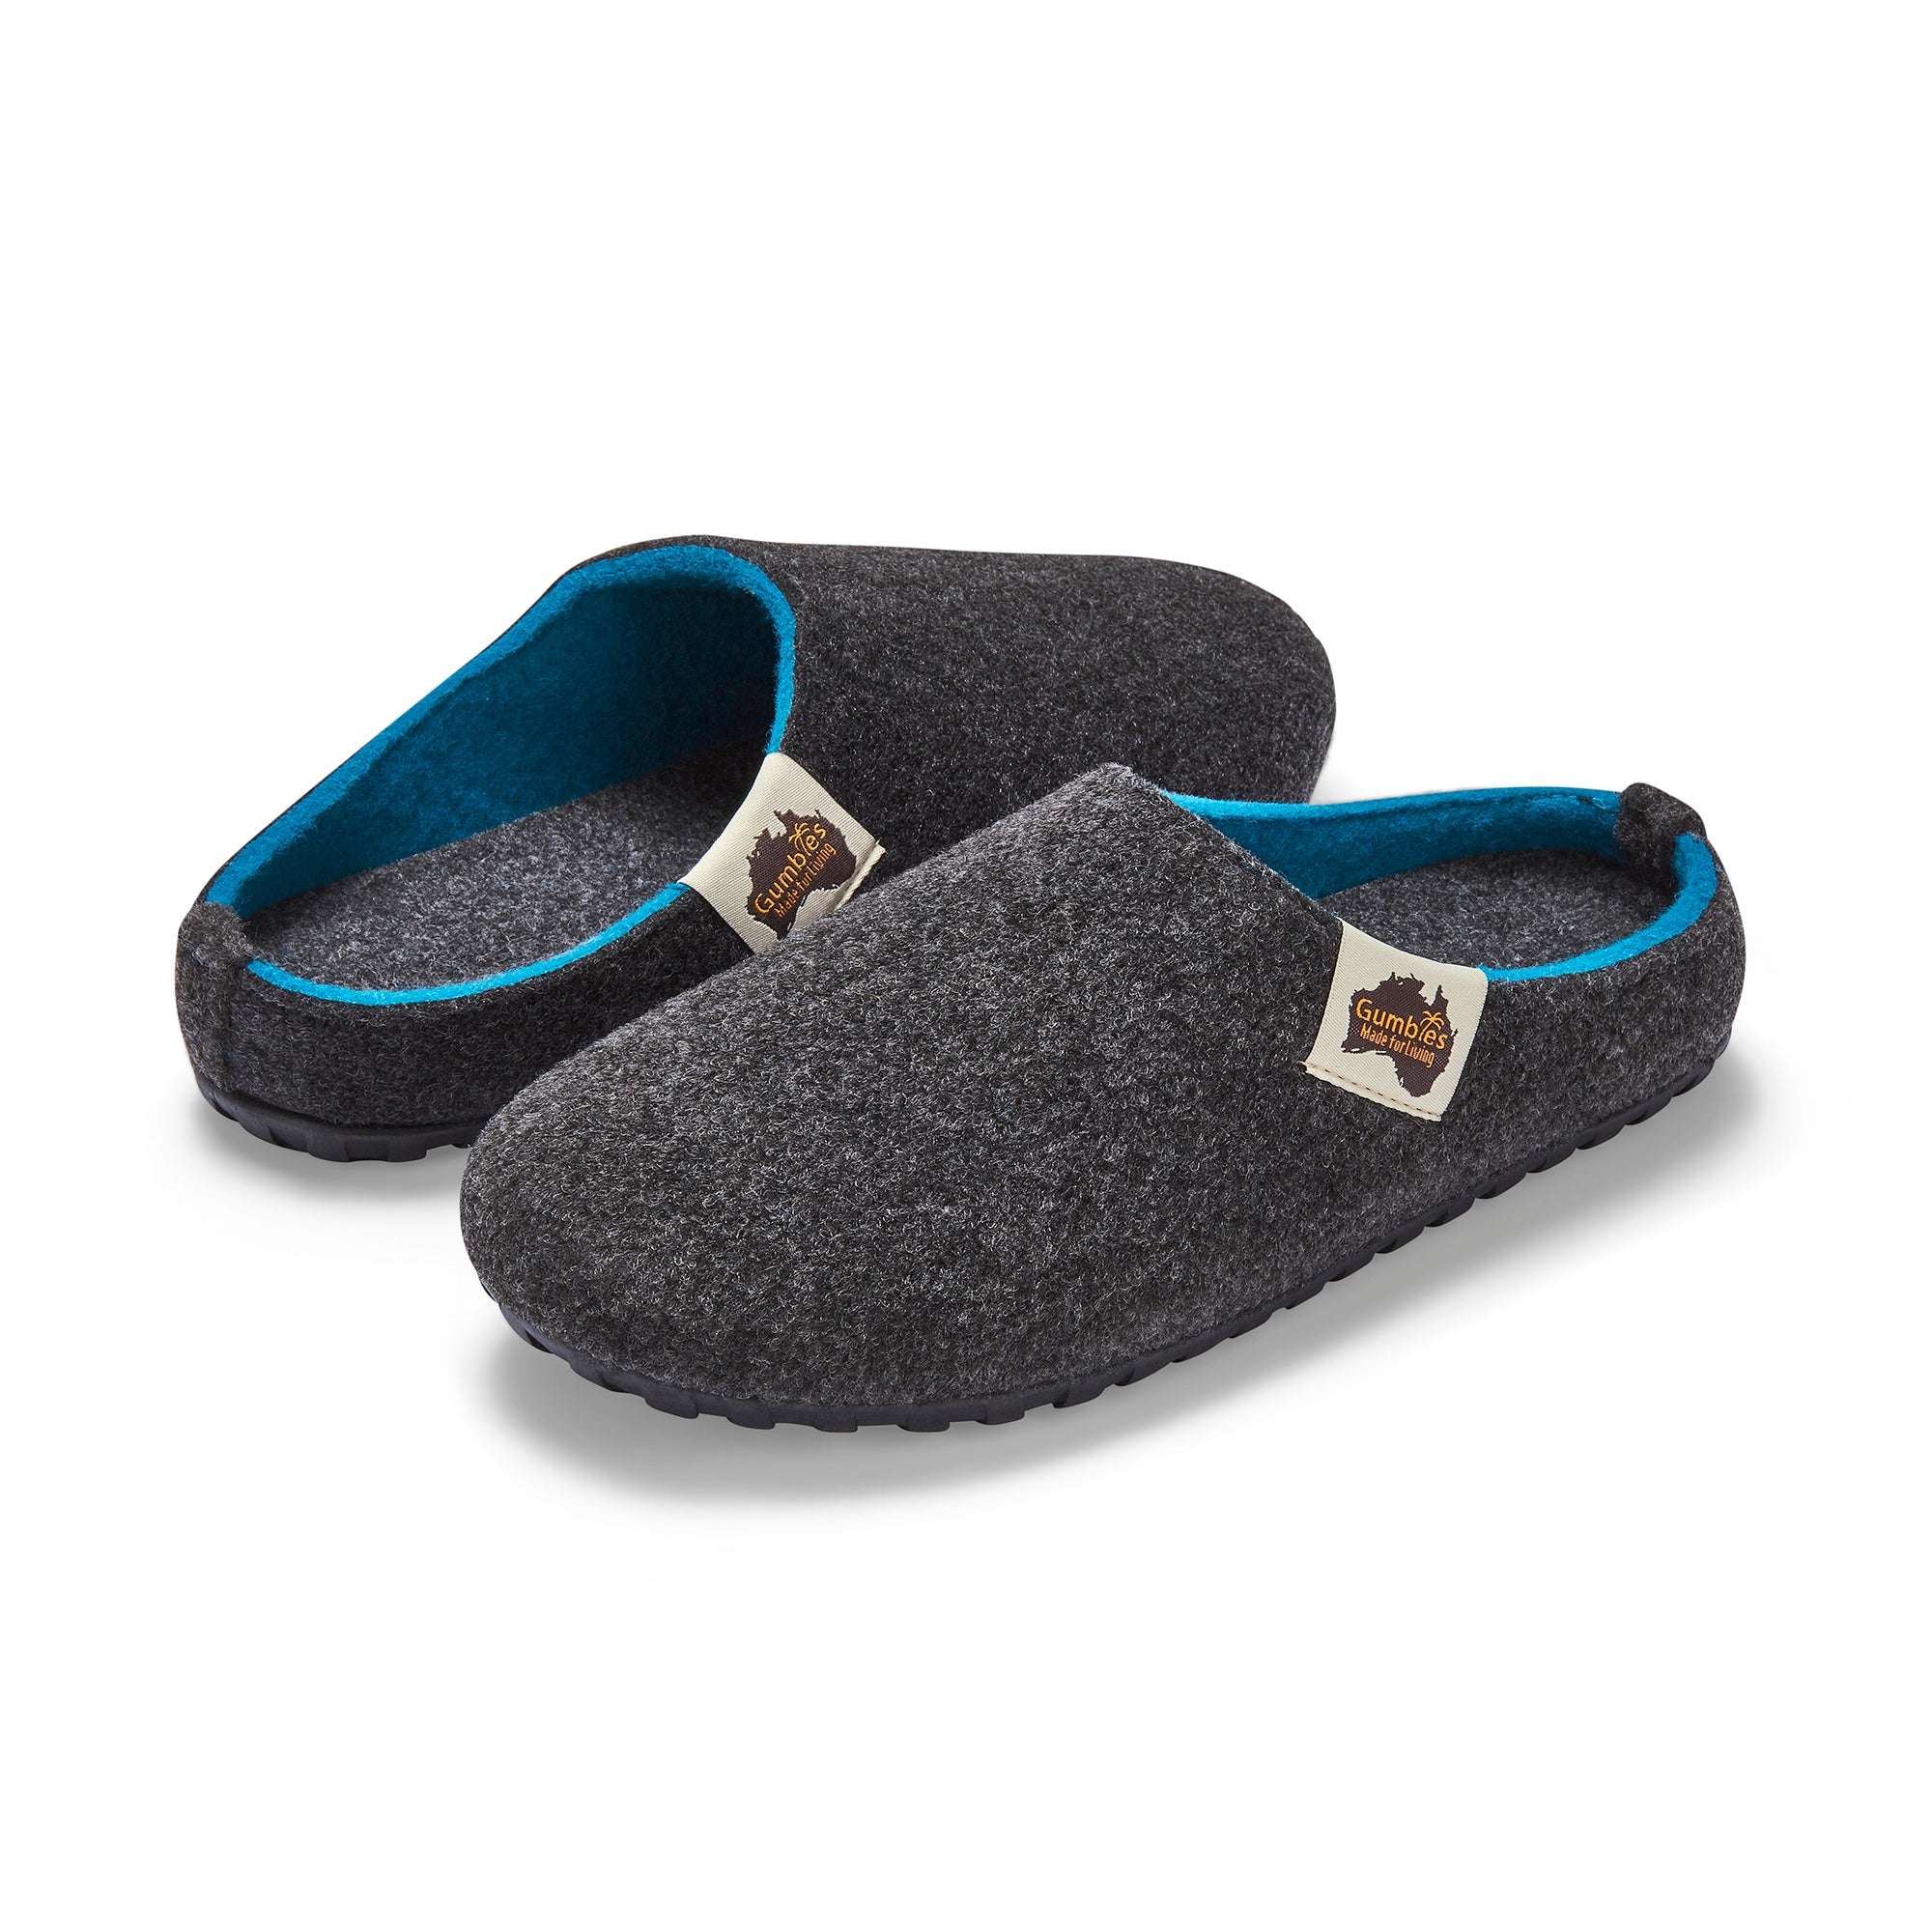 Outback - Women's - Charcoal & Turquoise